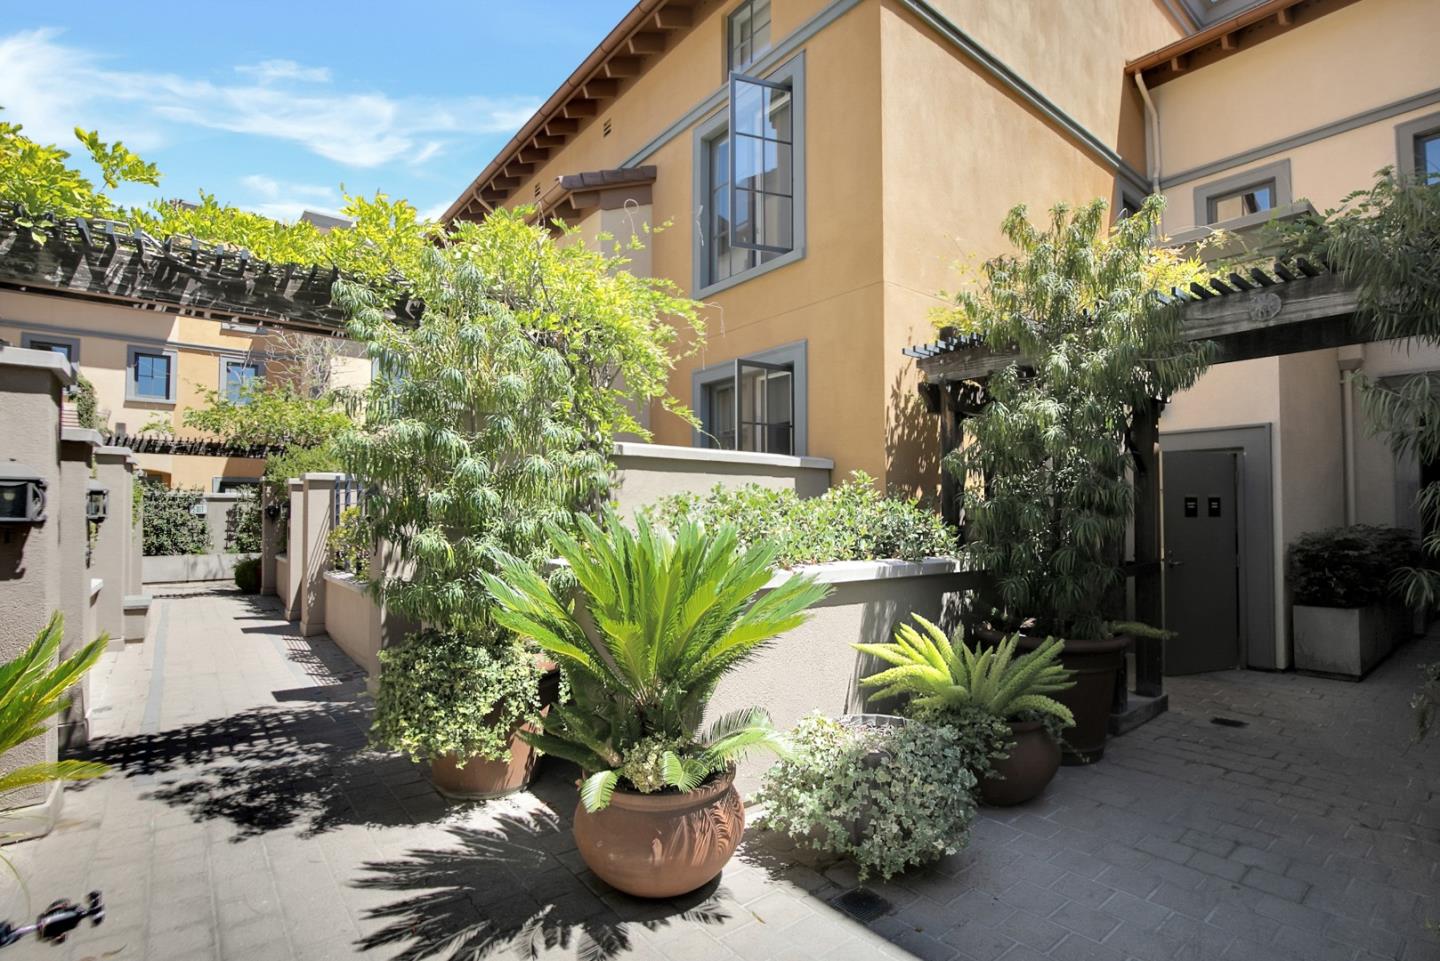 Condos, Lofts and Townhomes for Sale in San Jose Luxury Condos